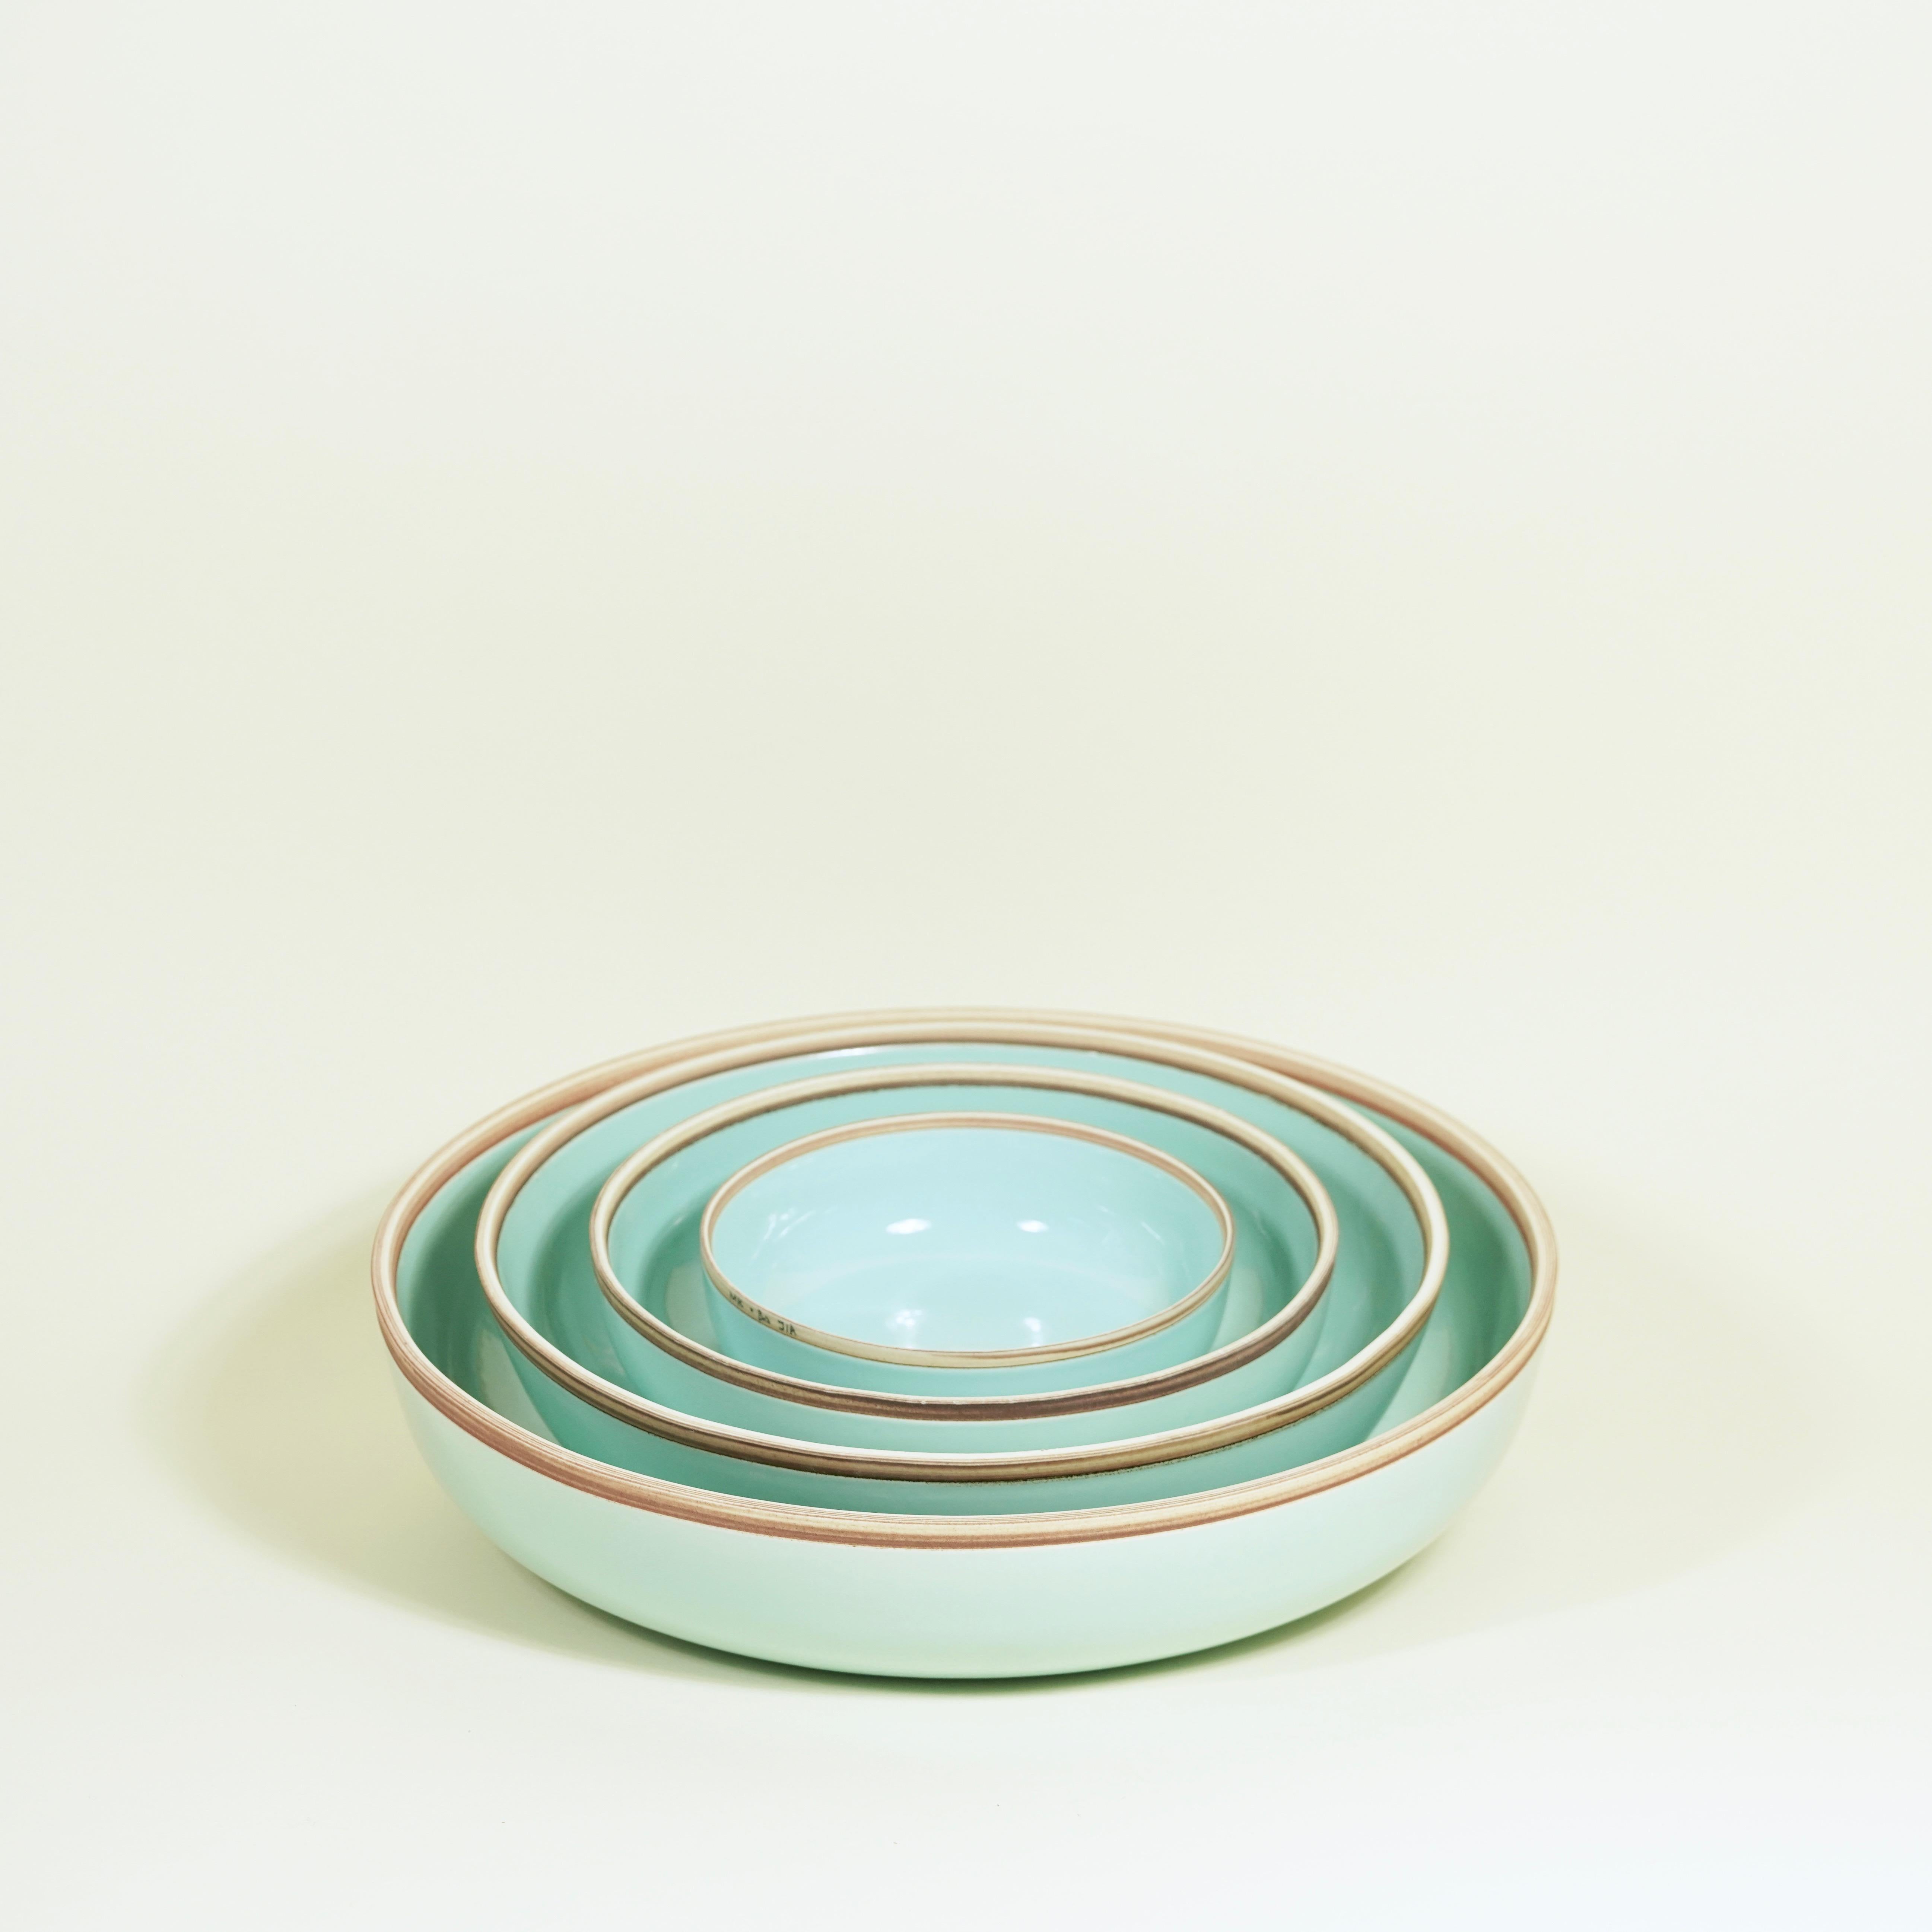 Chinese Large Celadon Glazed Porcelain Hermit Bowl with Rustic Rim